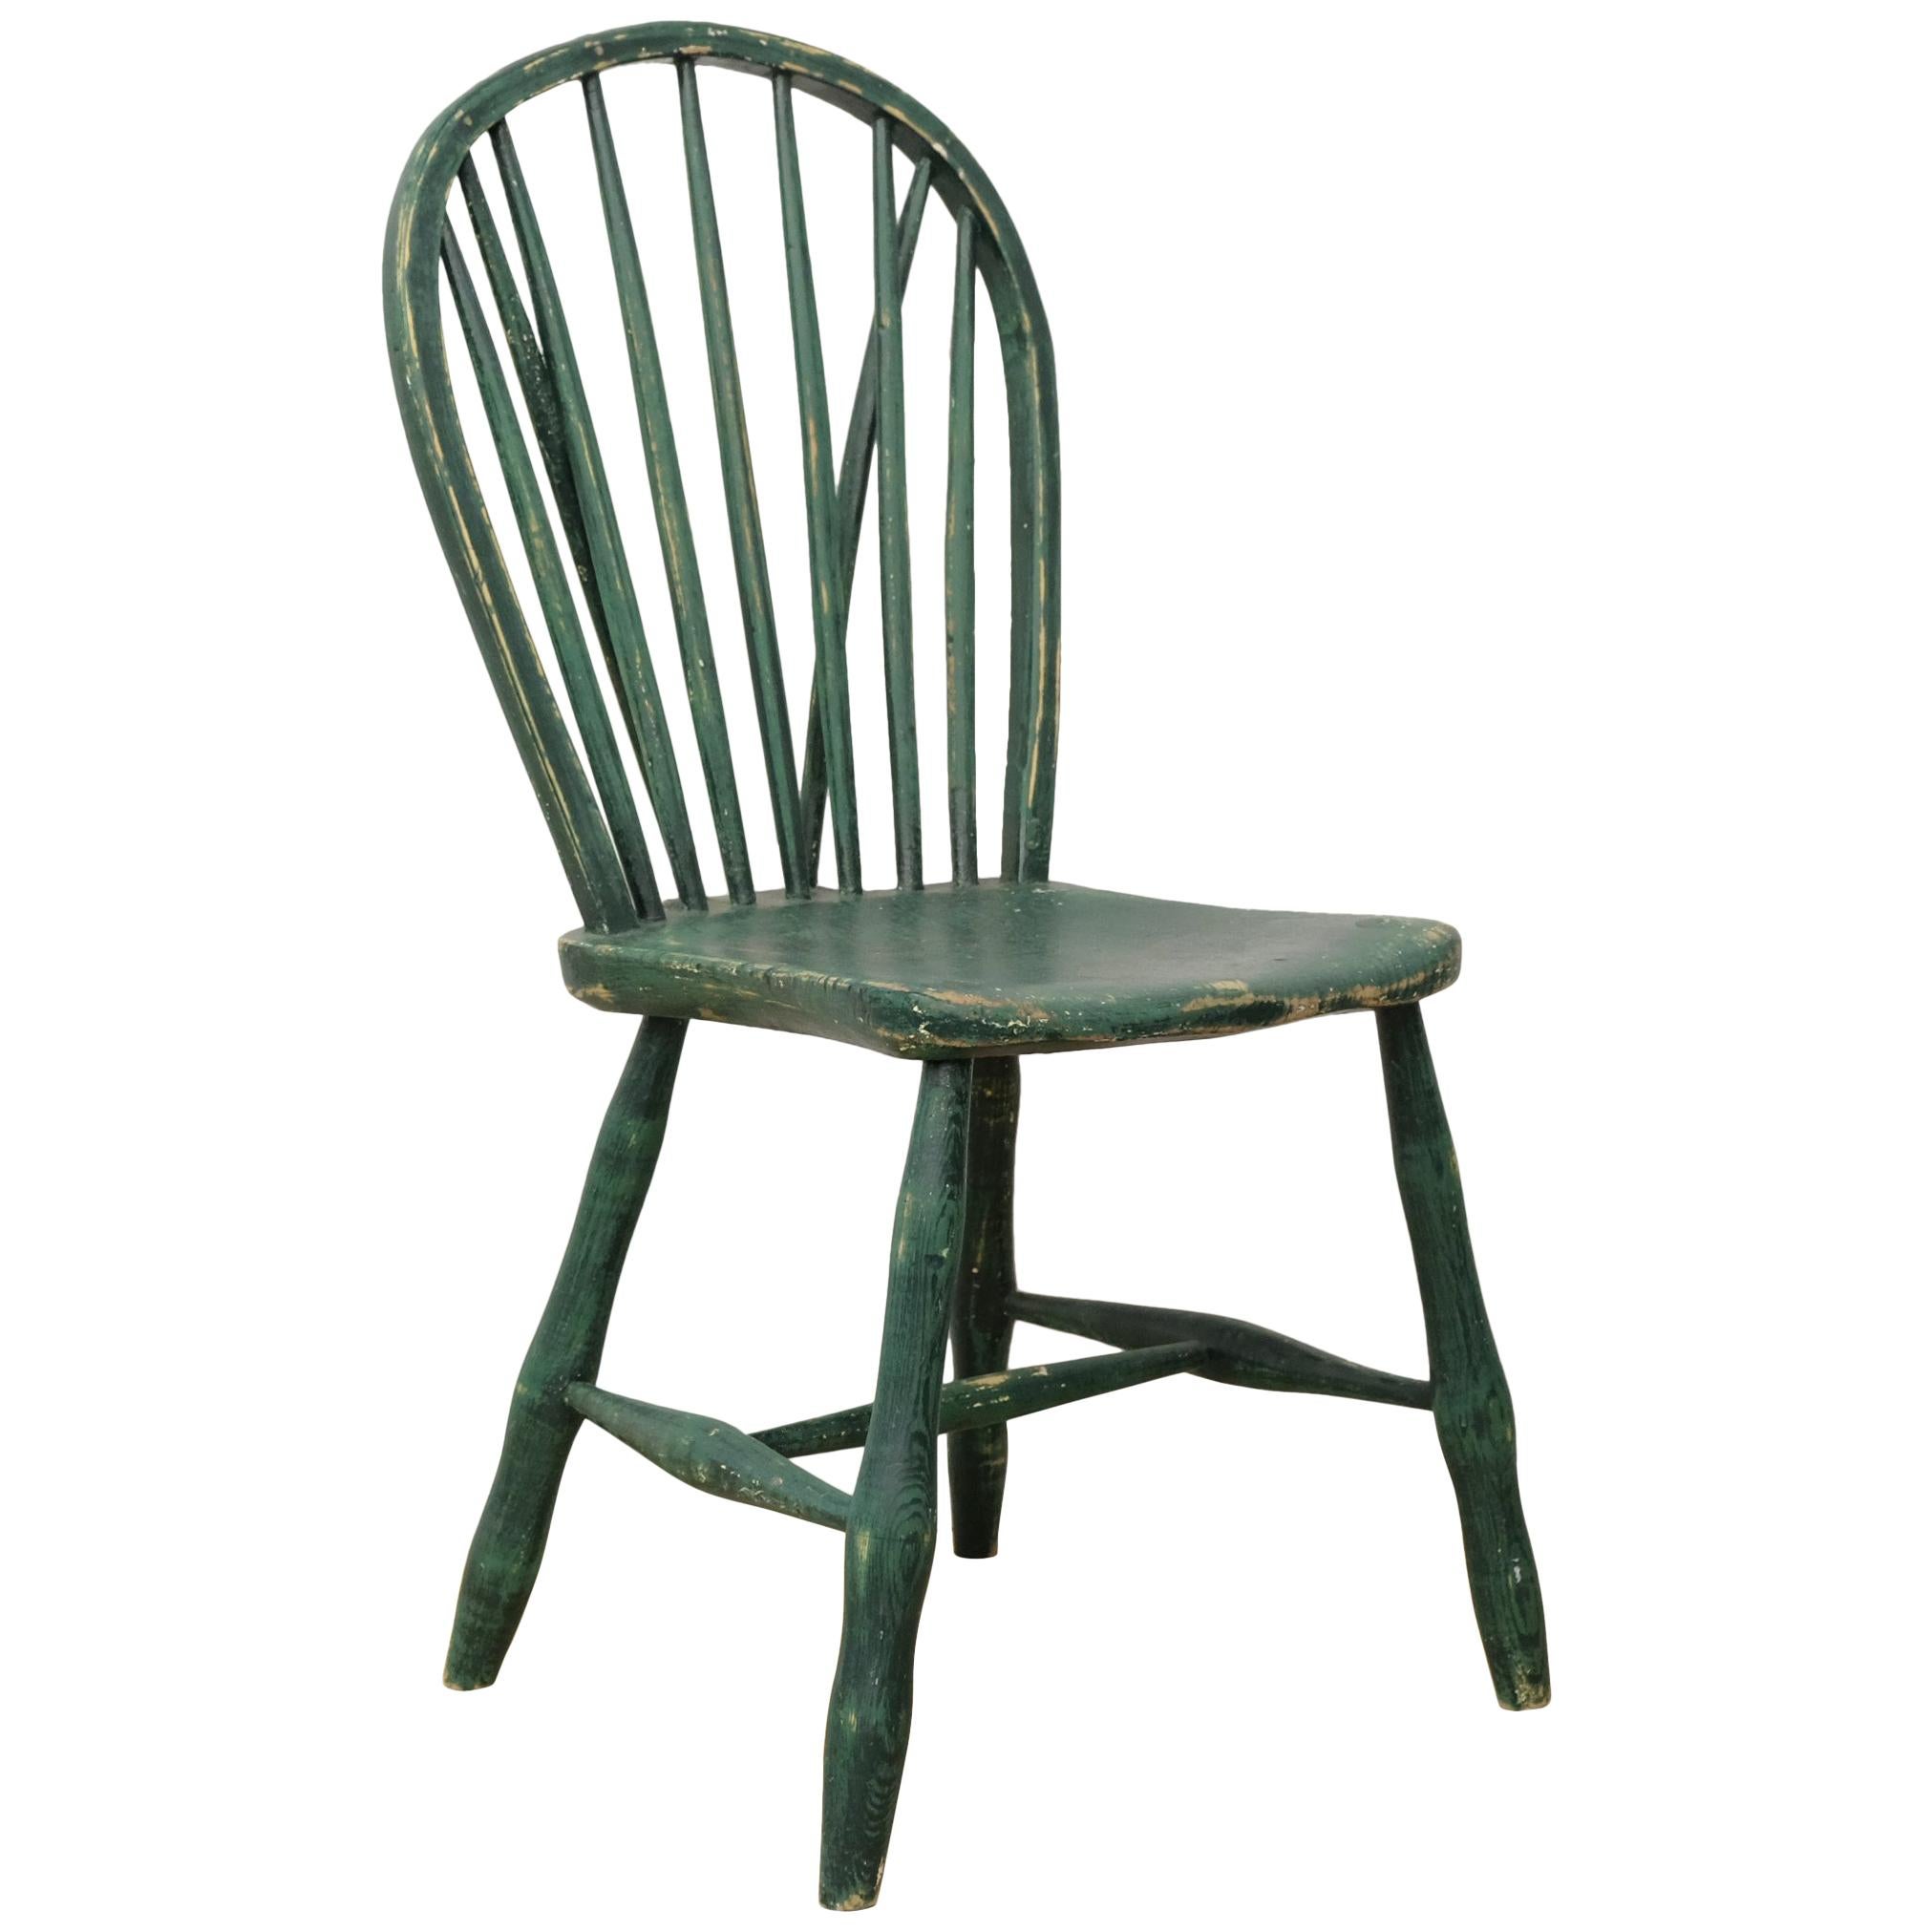 Yealmpton Side Chair, Old Green Paint, English, West Country, 1820s, Country